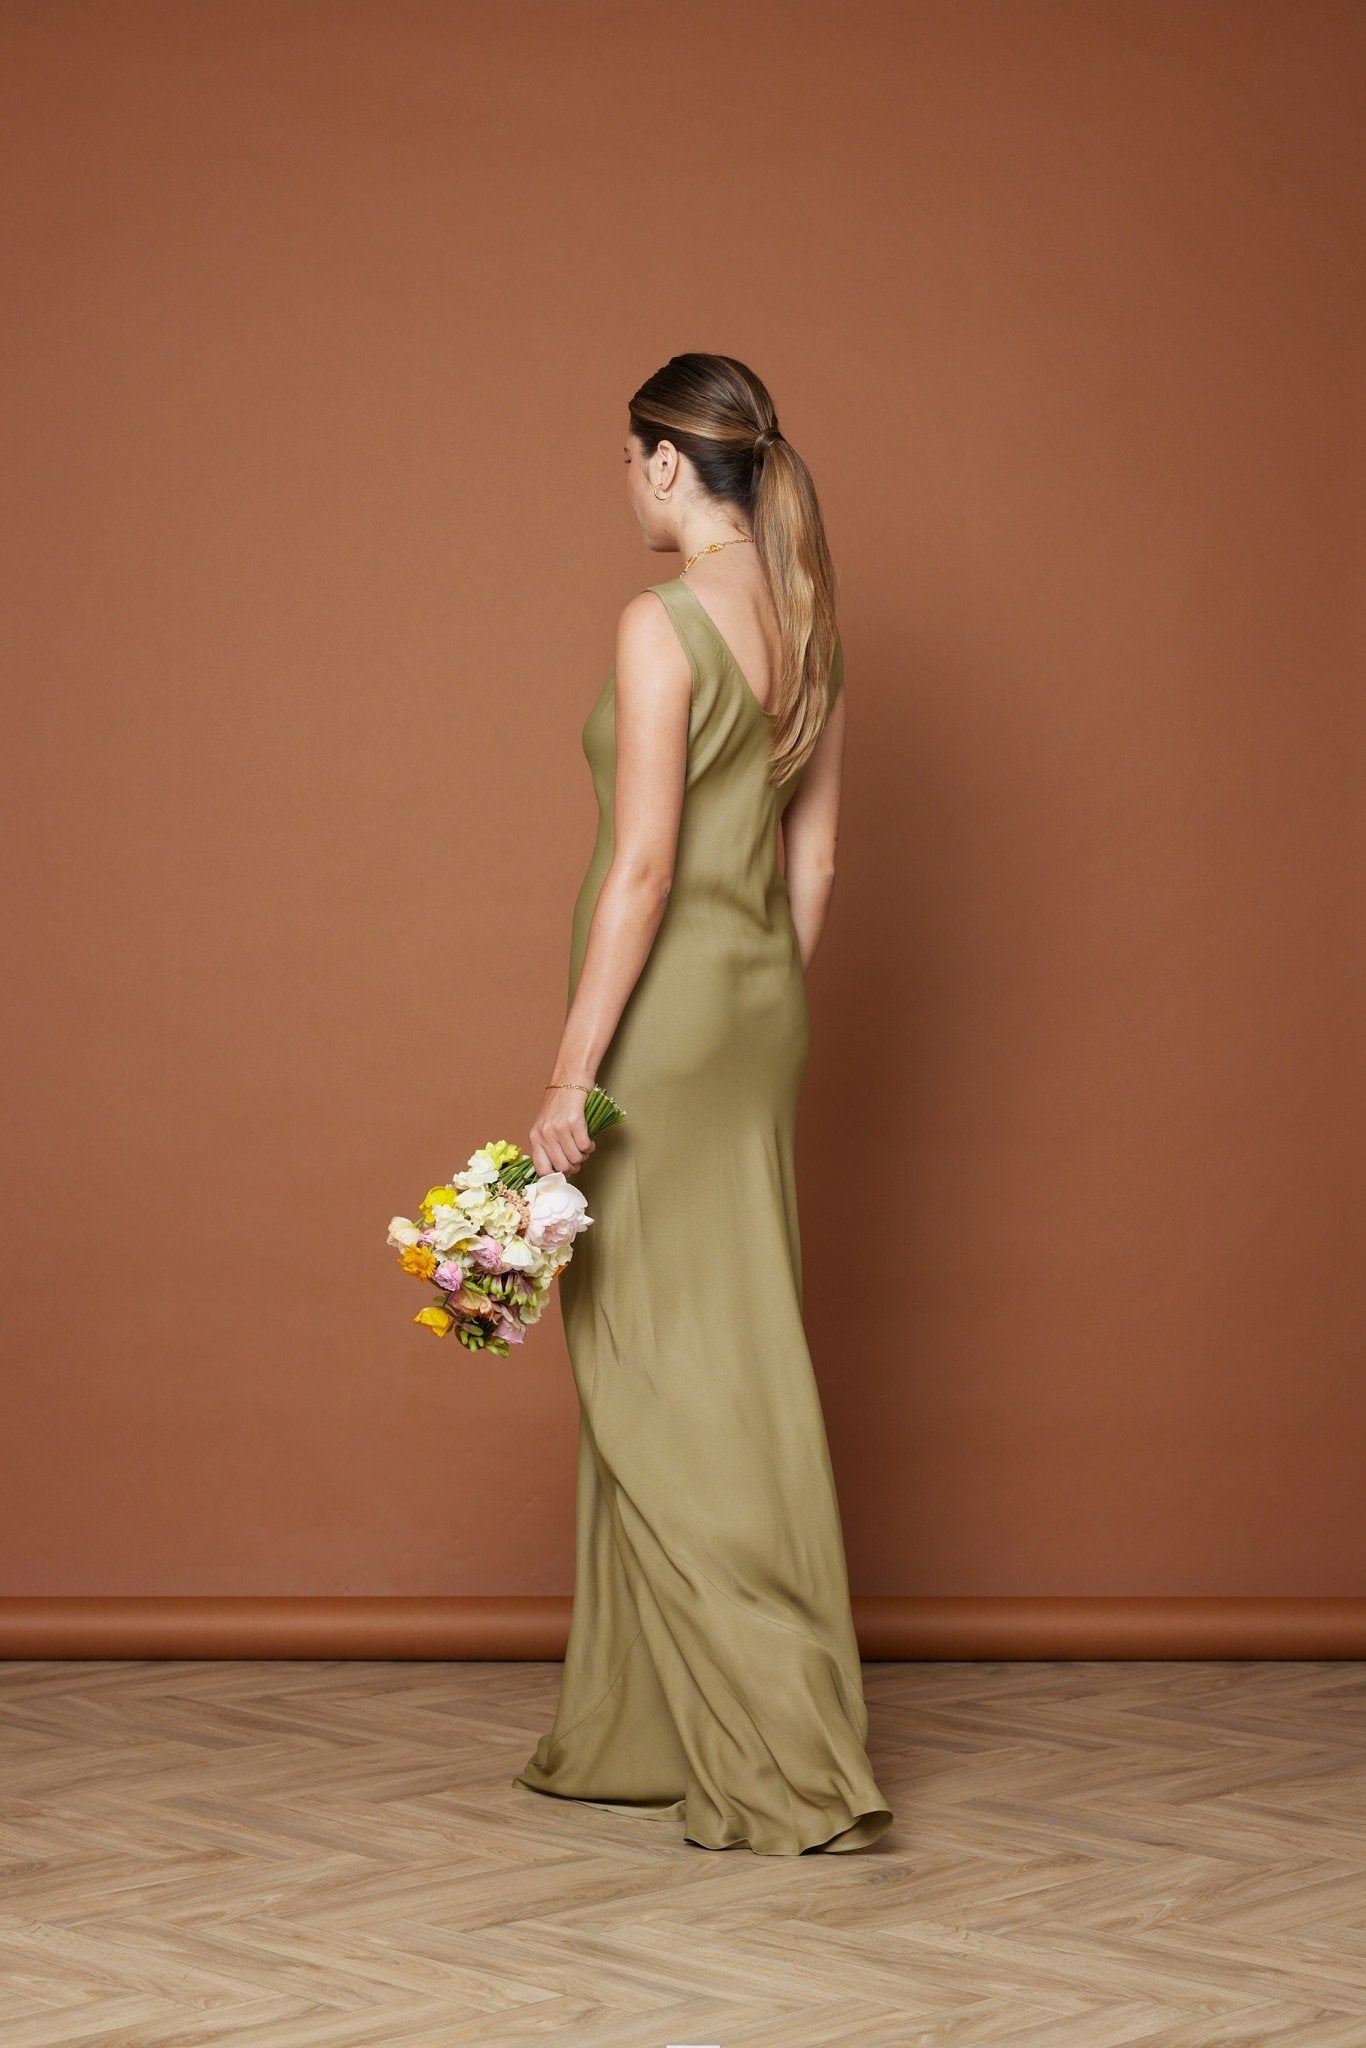 Pandy Satin Cowl Dress - Olive Green NEW - Maids to Measure